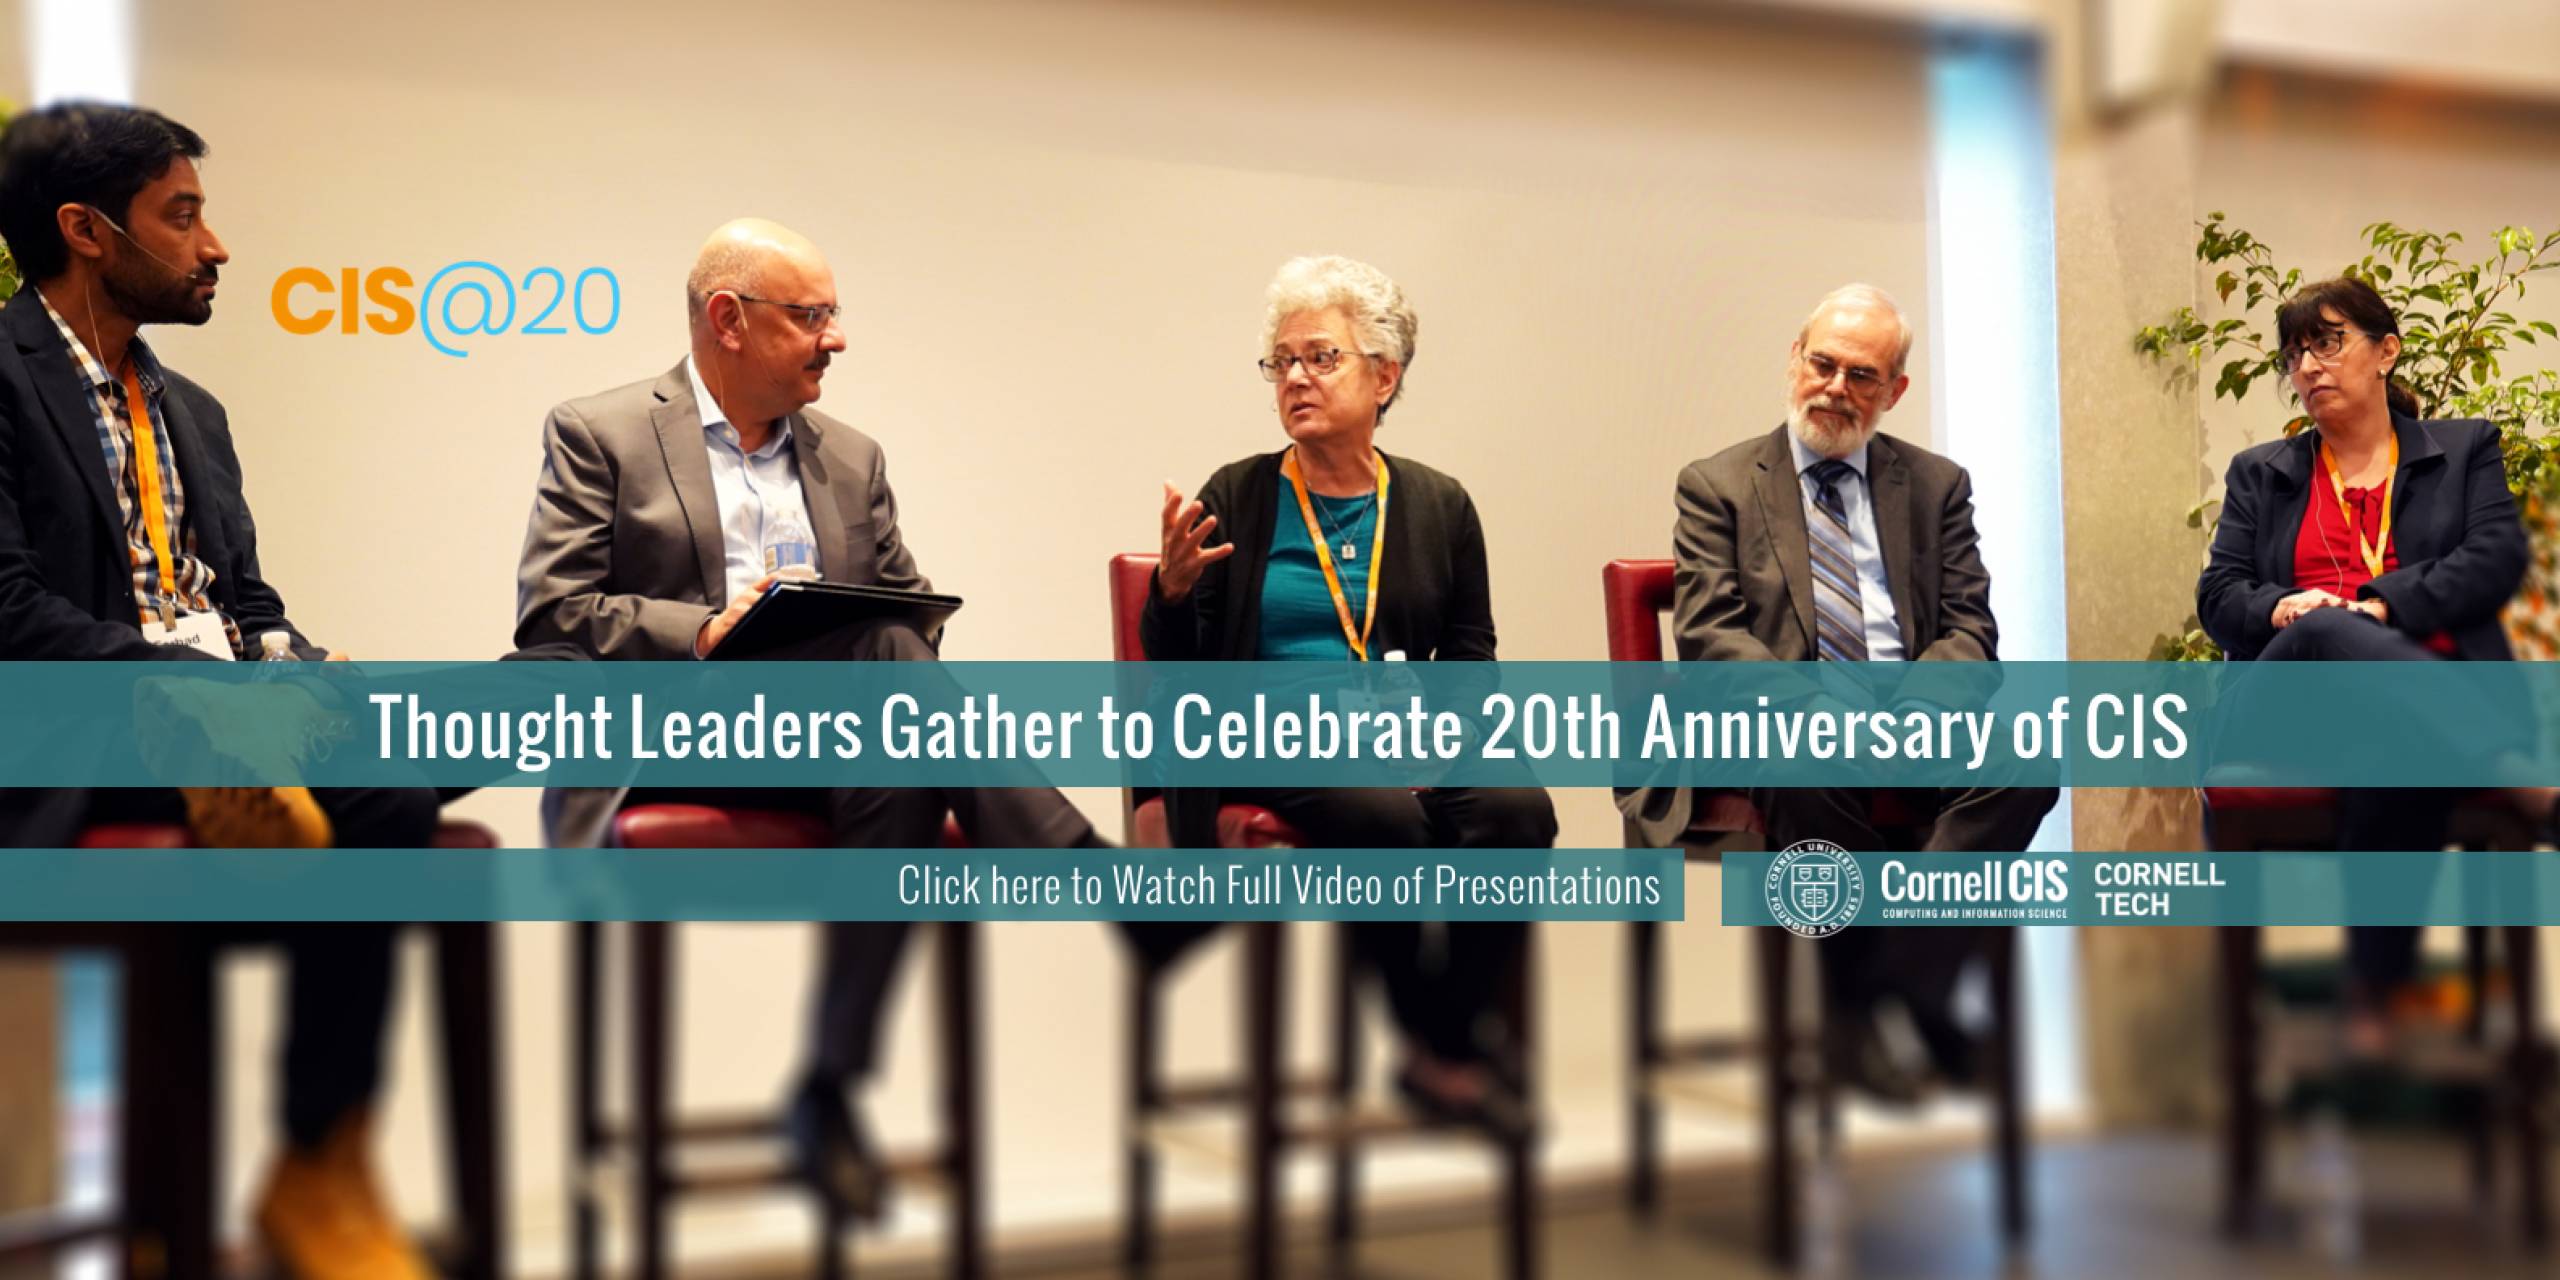 Thought Leaders Gather to Celebrate 20th Anniversary of CIS